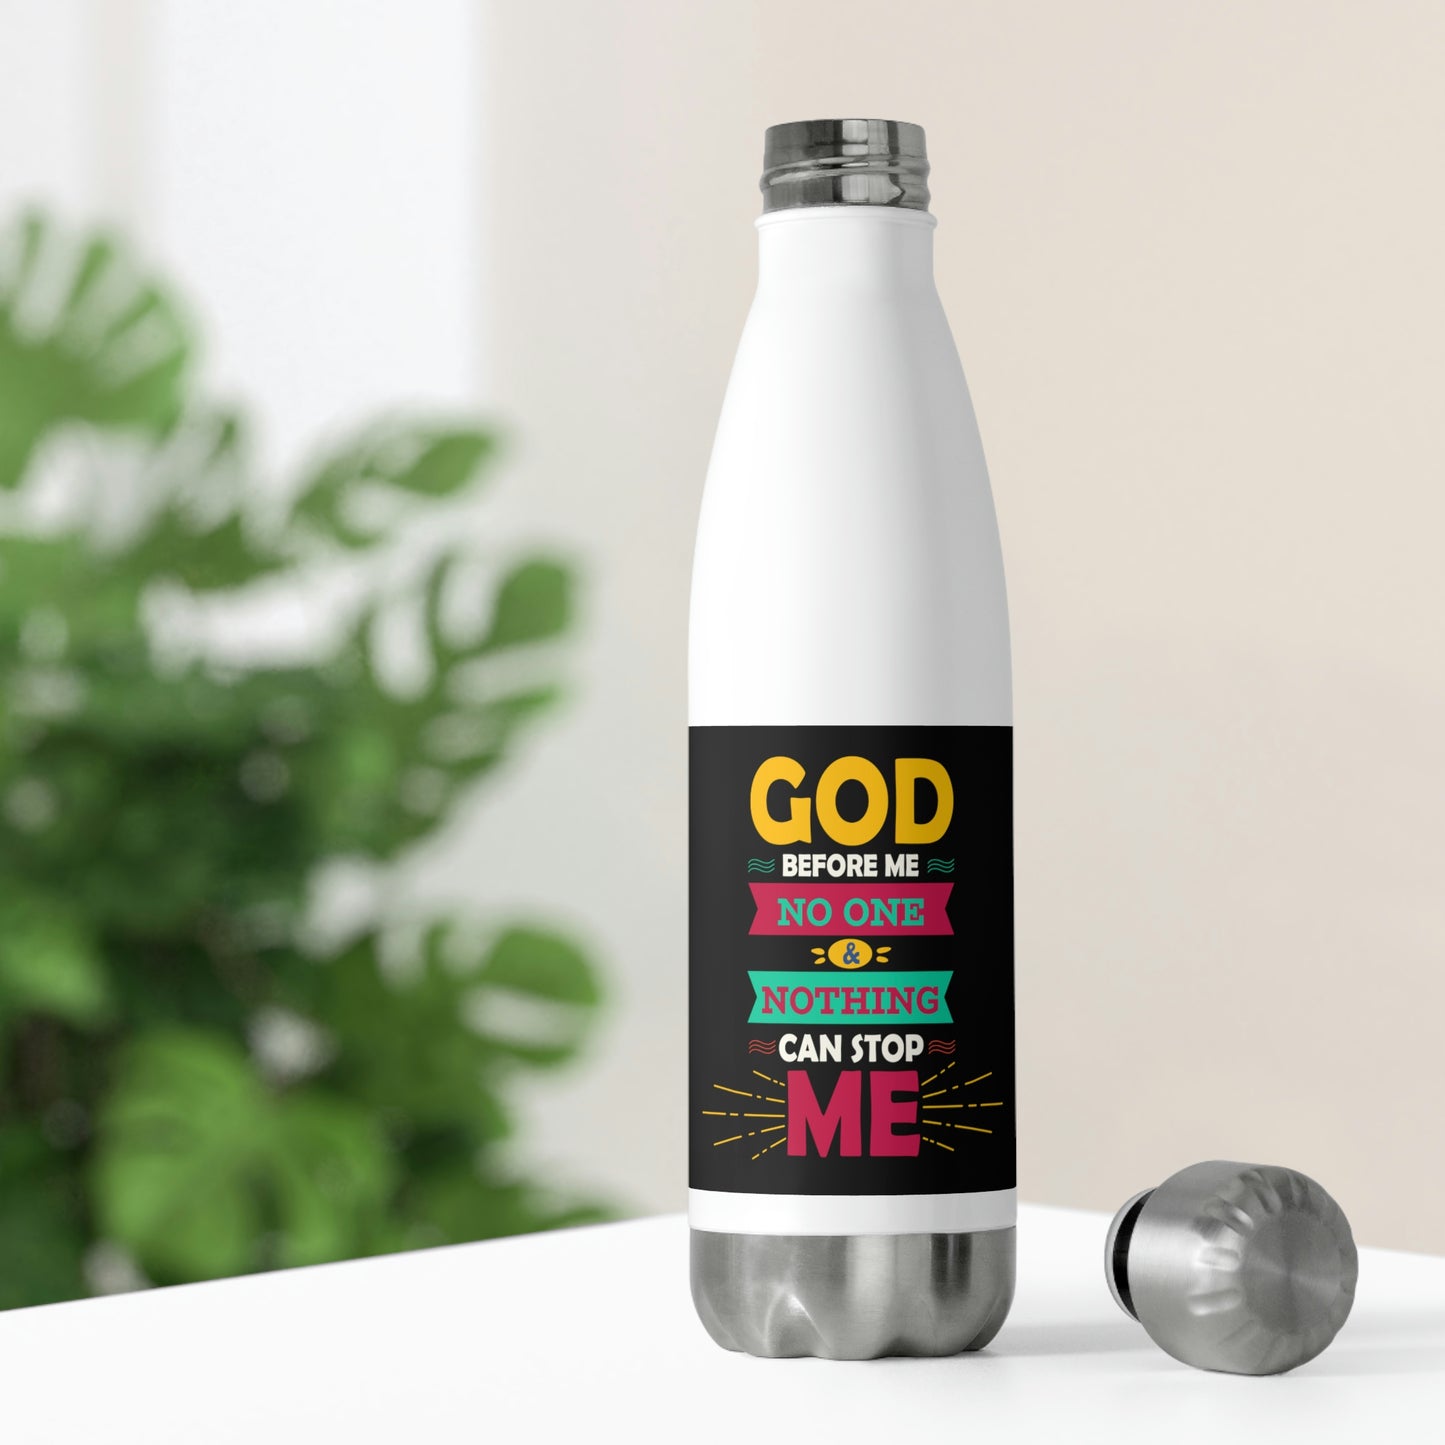 God Before Me No One & Nothing Can Stop Me Insulated Bottle